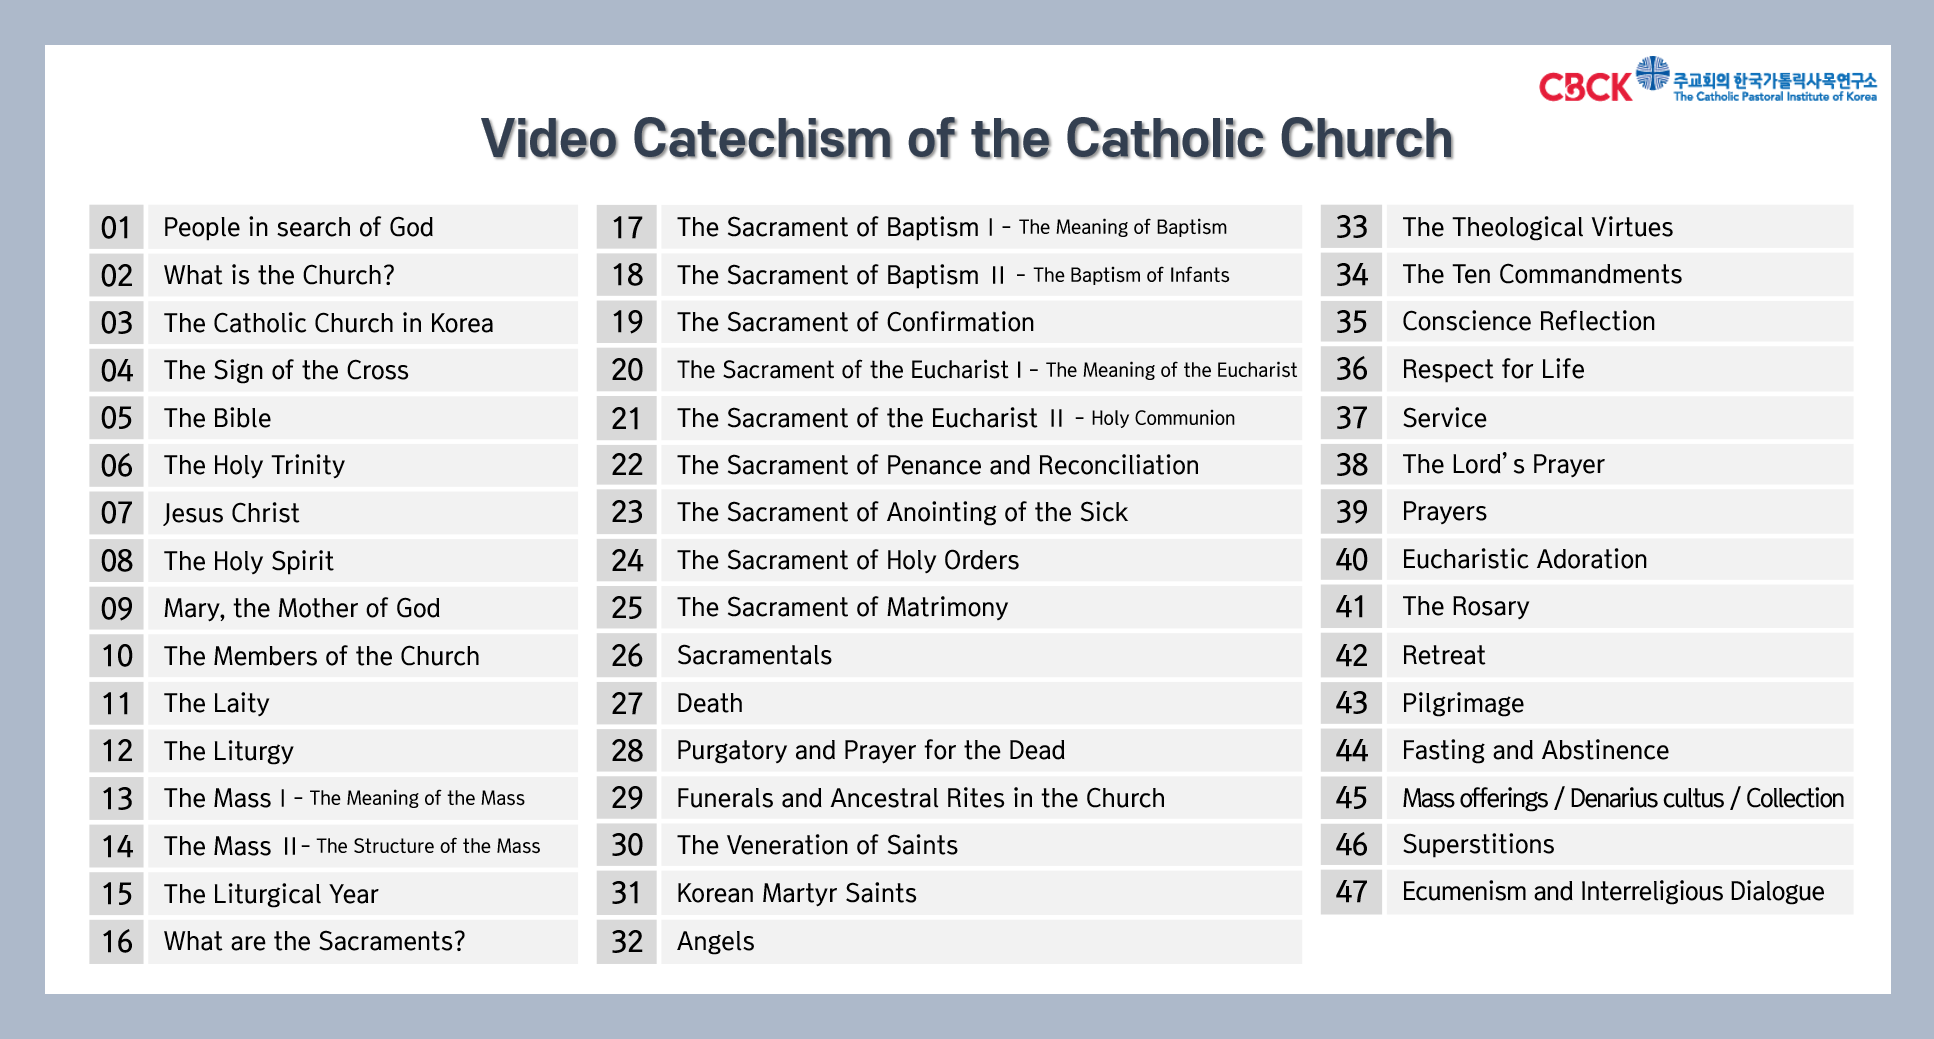 Video Catechism of the Catholic Church